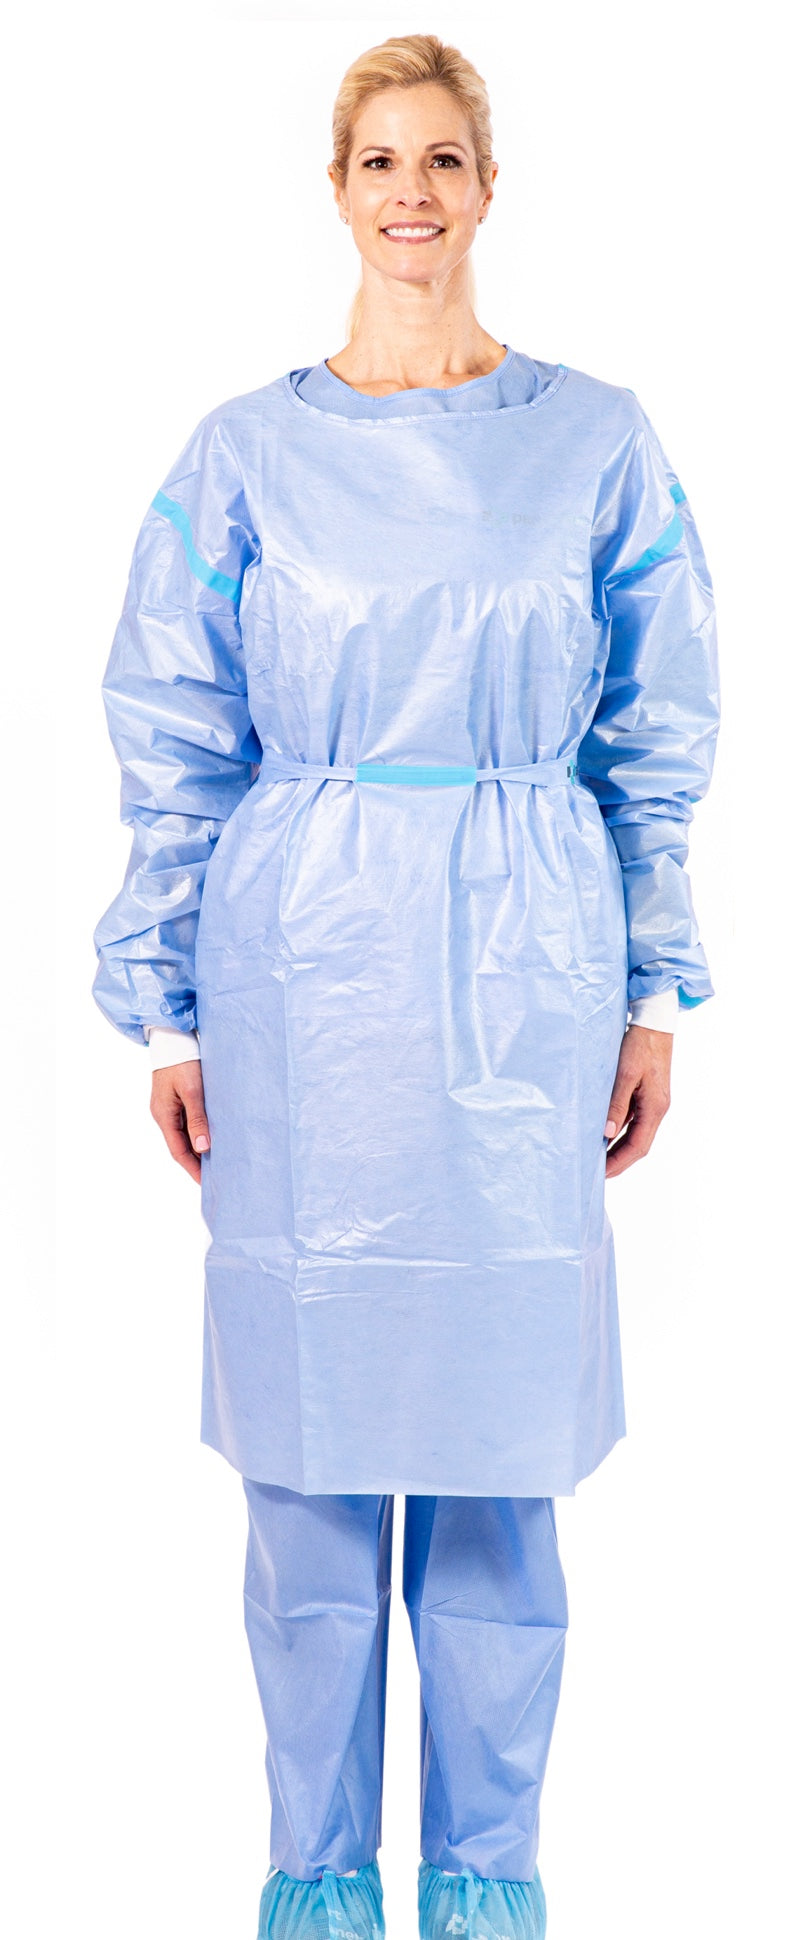 Standard  AAMI Level 3  Surgical Gowns  Veterinary